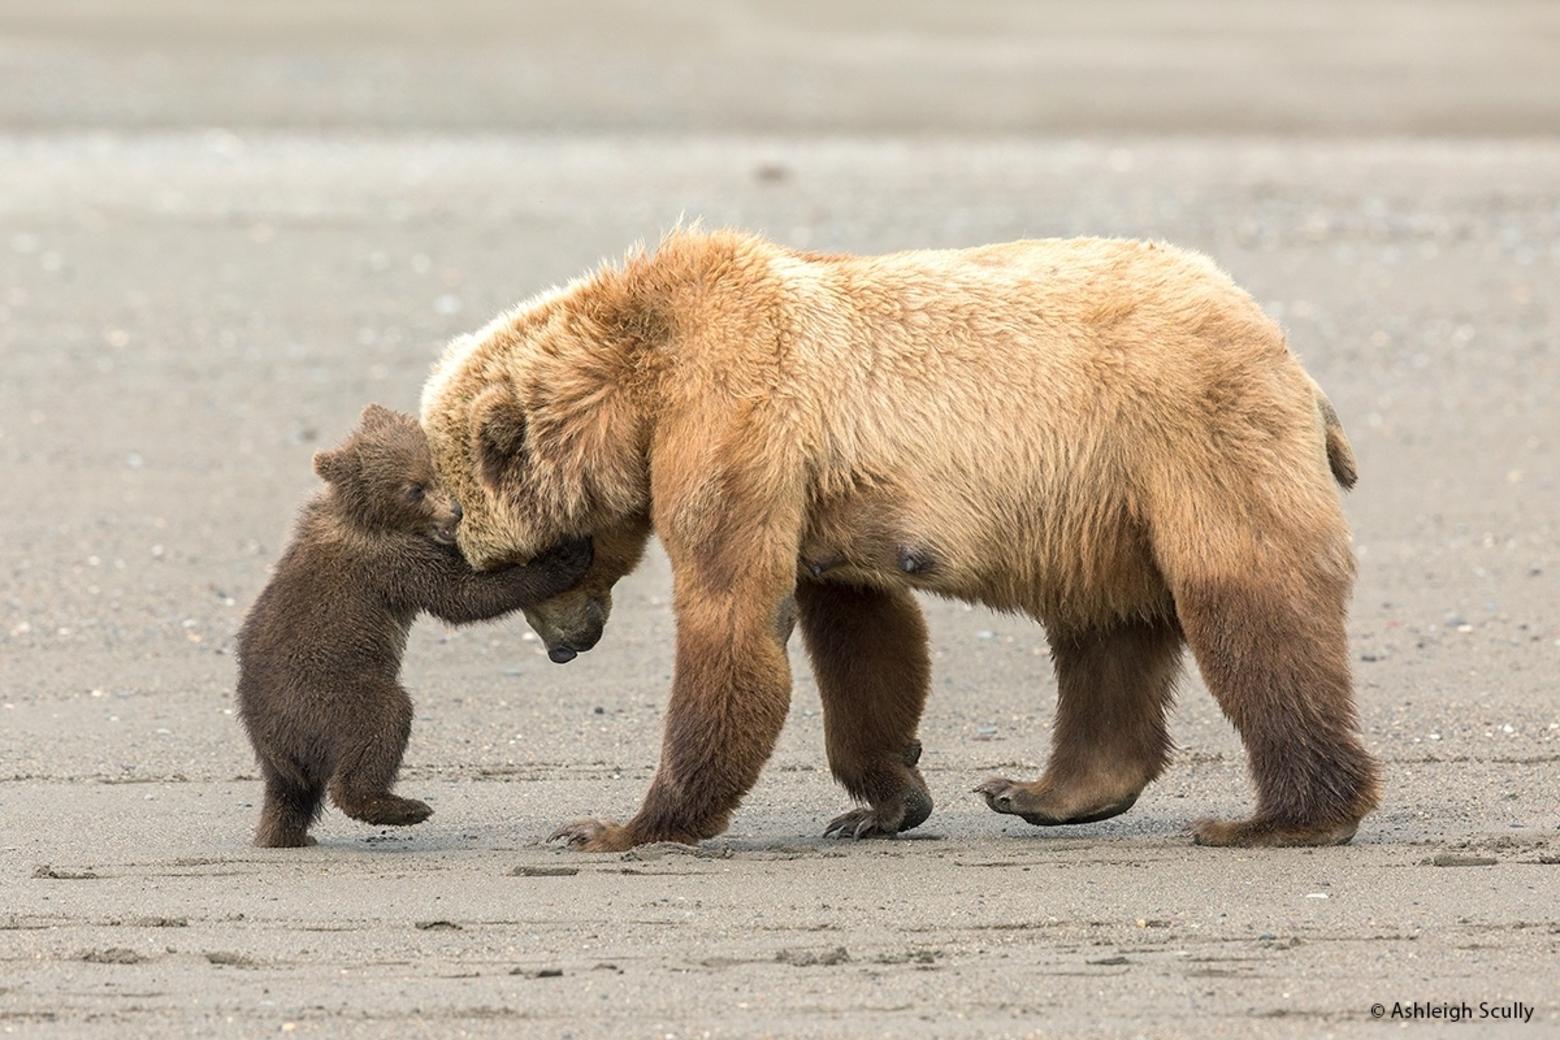 Observes Ashleigh Scully: &quot;This image of a coastal brown bear sow and her spring cub was taken one June afternoon at Lake Clark National Park in Alaska. I witnessed a lot of unique behavior among the resident bears at this park, including this mother and her two cubs. This image was honored as a runner-up in the 2017 Wildlife Photographer of the Year competition in the 11-14 year-old category, close behind the winner, which was a red fox image that I took. In this image, the mother brown bear was wrestling with one of her cubs, play-fighting on the beach after a session digging up clams in the soft tidal mud. While the mother is likely teaching her cub how to be strong and tough, it is hard not to notice the affectionate nature of the embrace as well. I was so glad to have witnessed this scene, as it changed my perspective on bears forever.&quot;